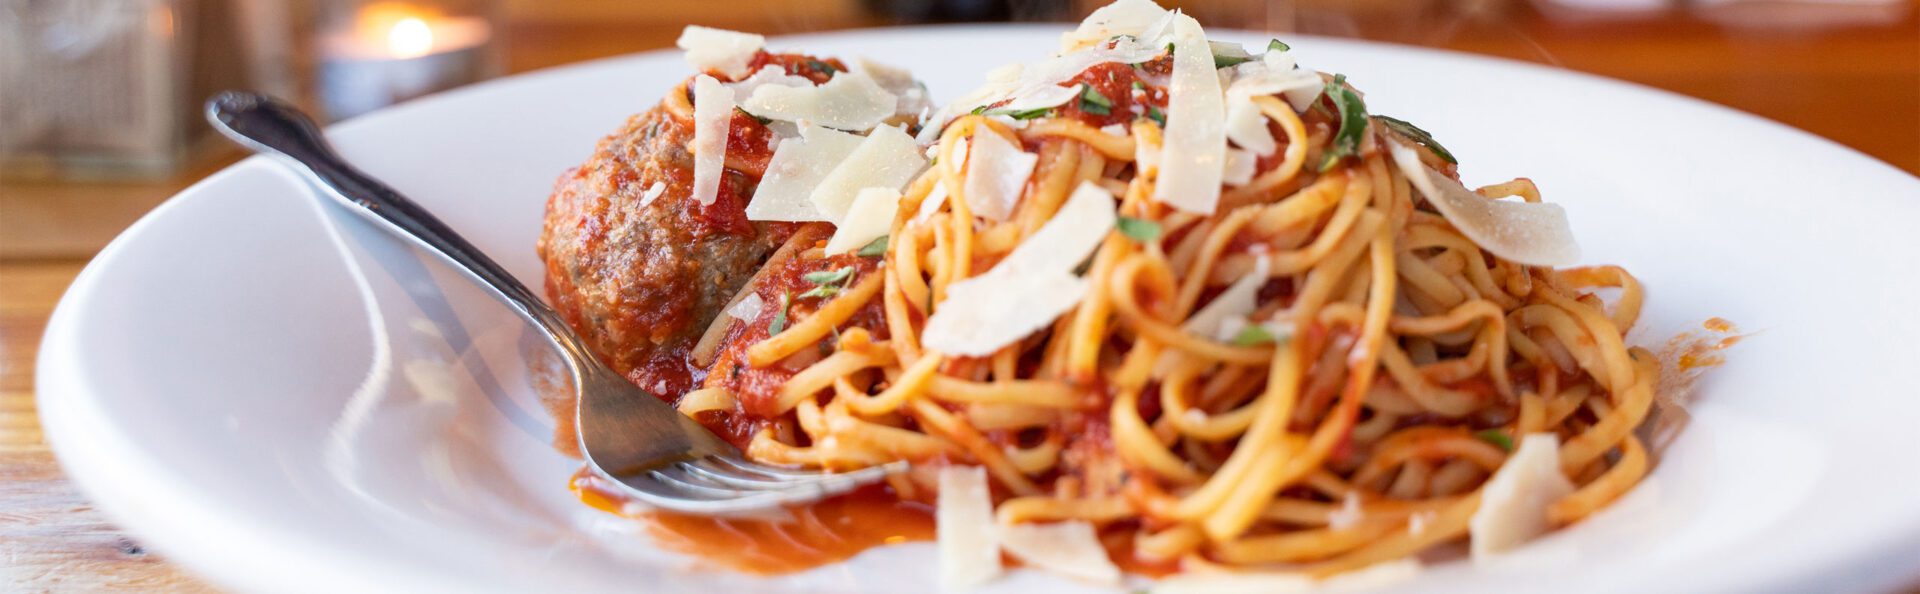 A plate of spaghetti and sauce with parmesan cheese.